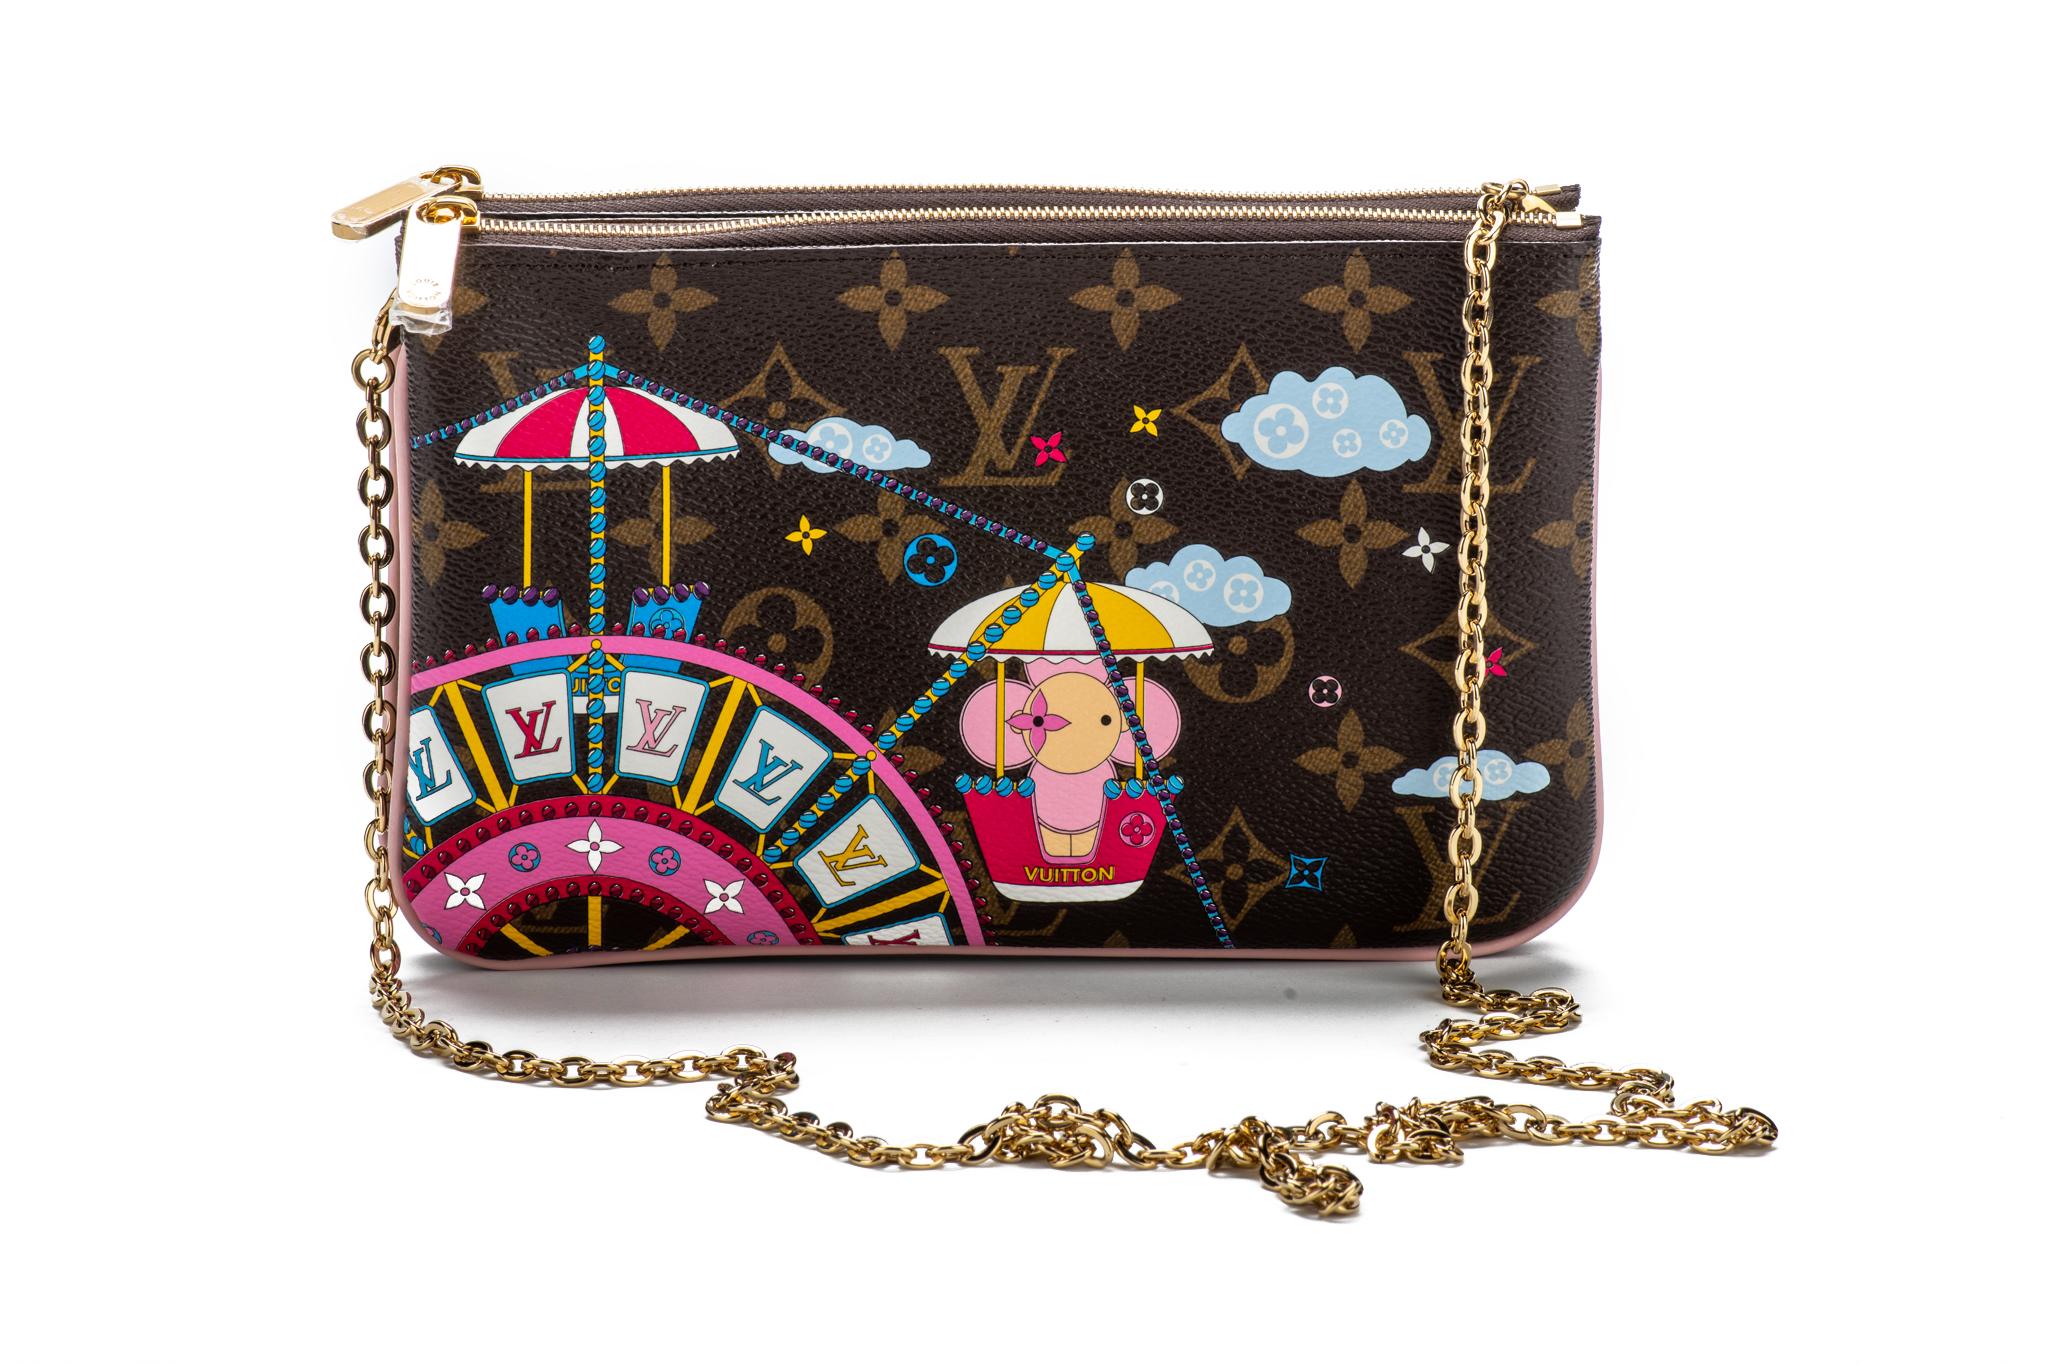 Louis Vuitton limited edition double pochette in coated monogram canvas with Ferris Wheel 2020 Christmas design. Double zipped compartments with middle open pocket, can be used as a pochette or as a cross body. Comes with original dust cover and